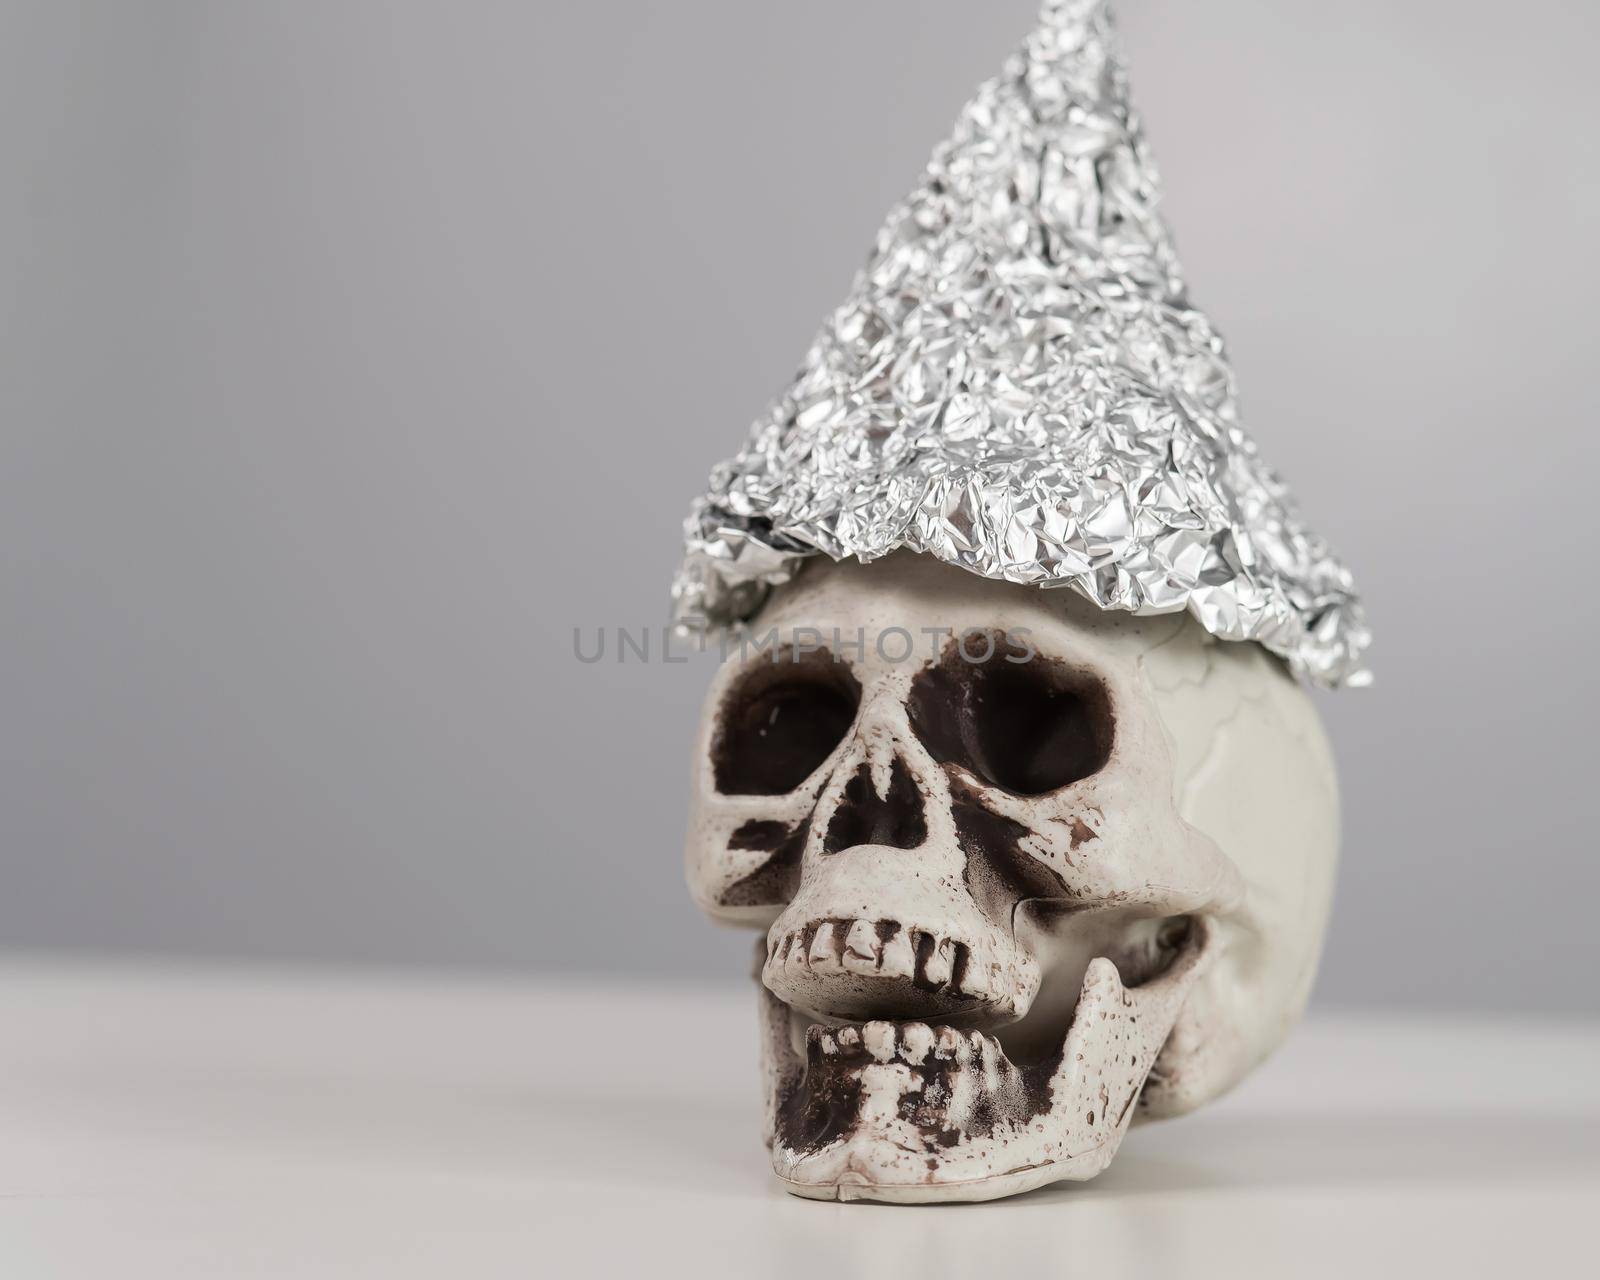 Plastic skull in a tinfoil cap on a white background. by mrwed54